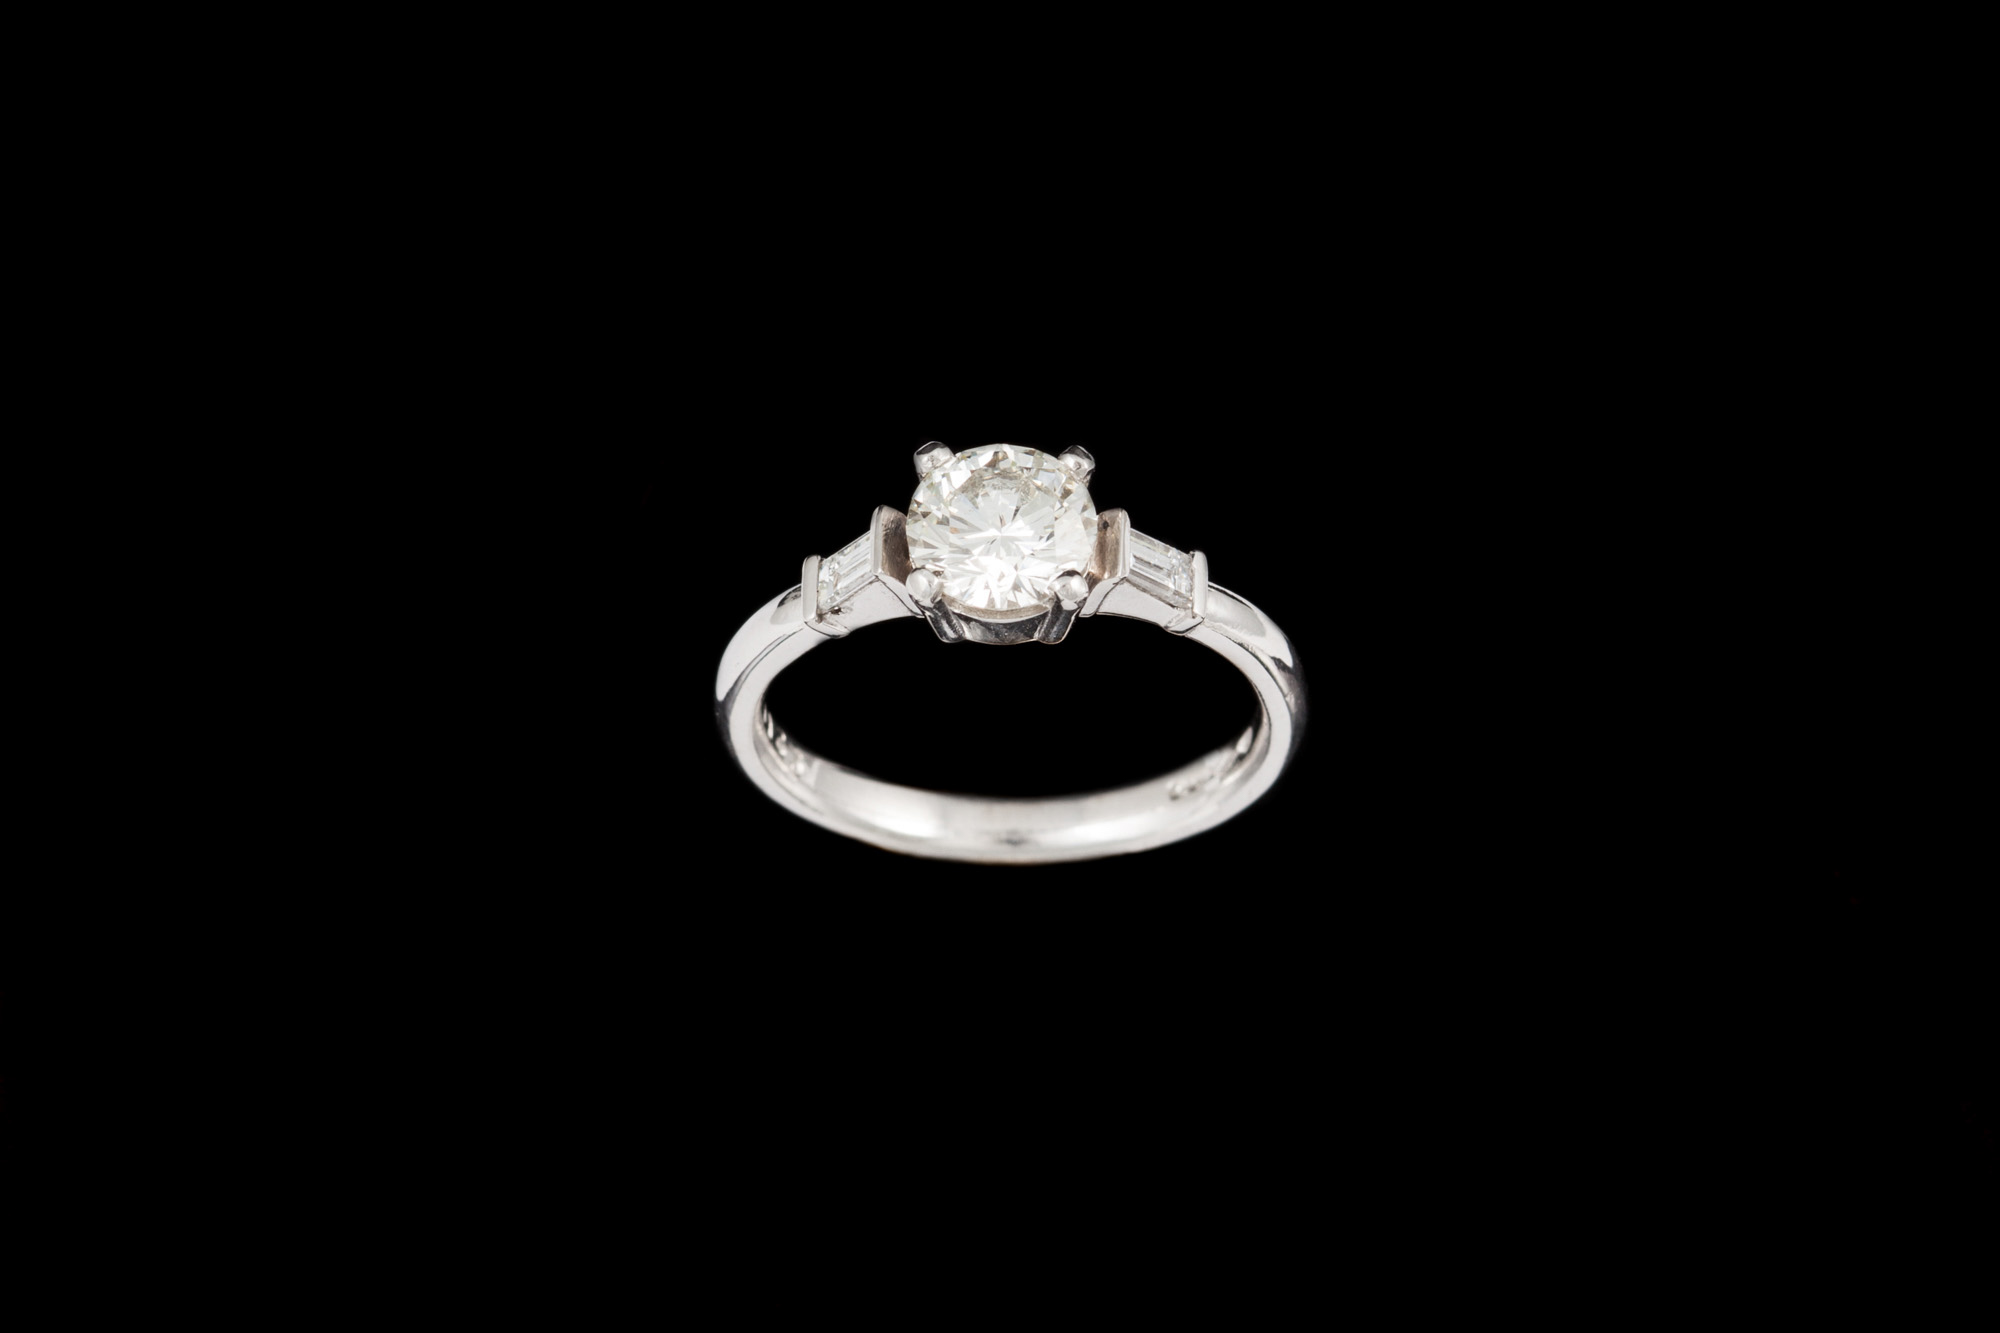 A DIAMOND SOLITAIRE RING, of approx. 1.32ct I/J SI1, mounted in platinum